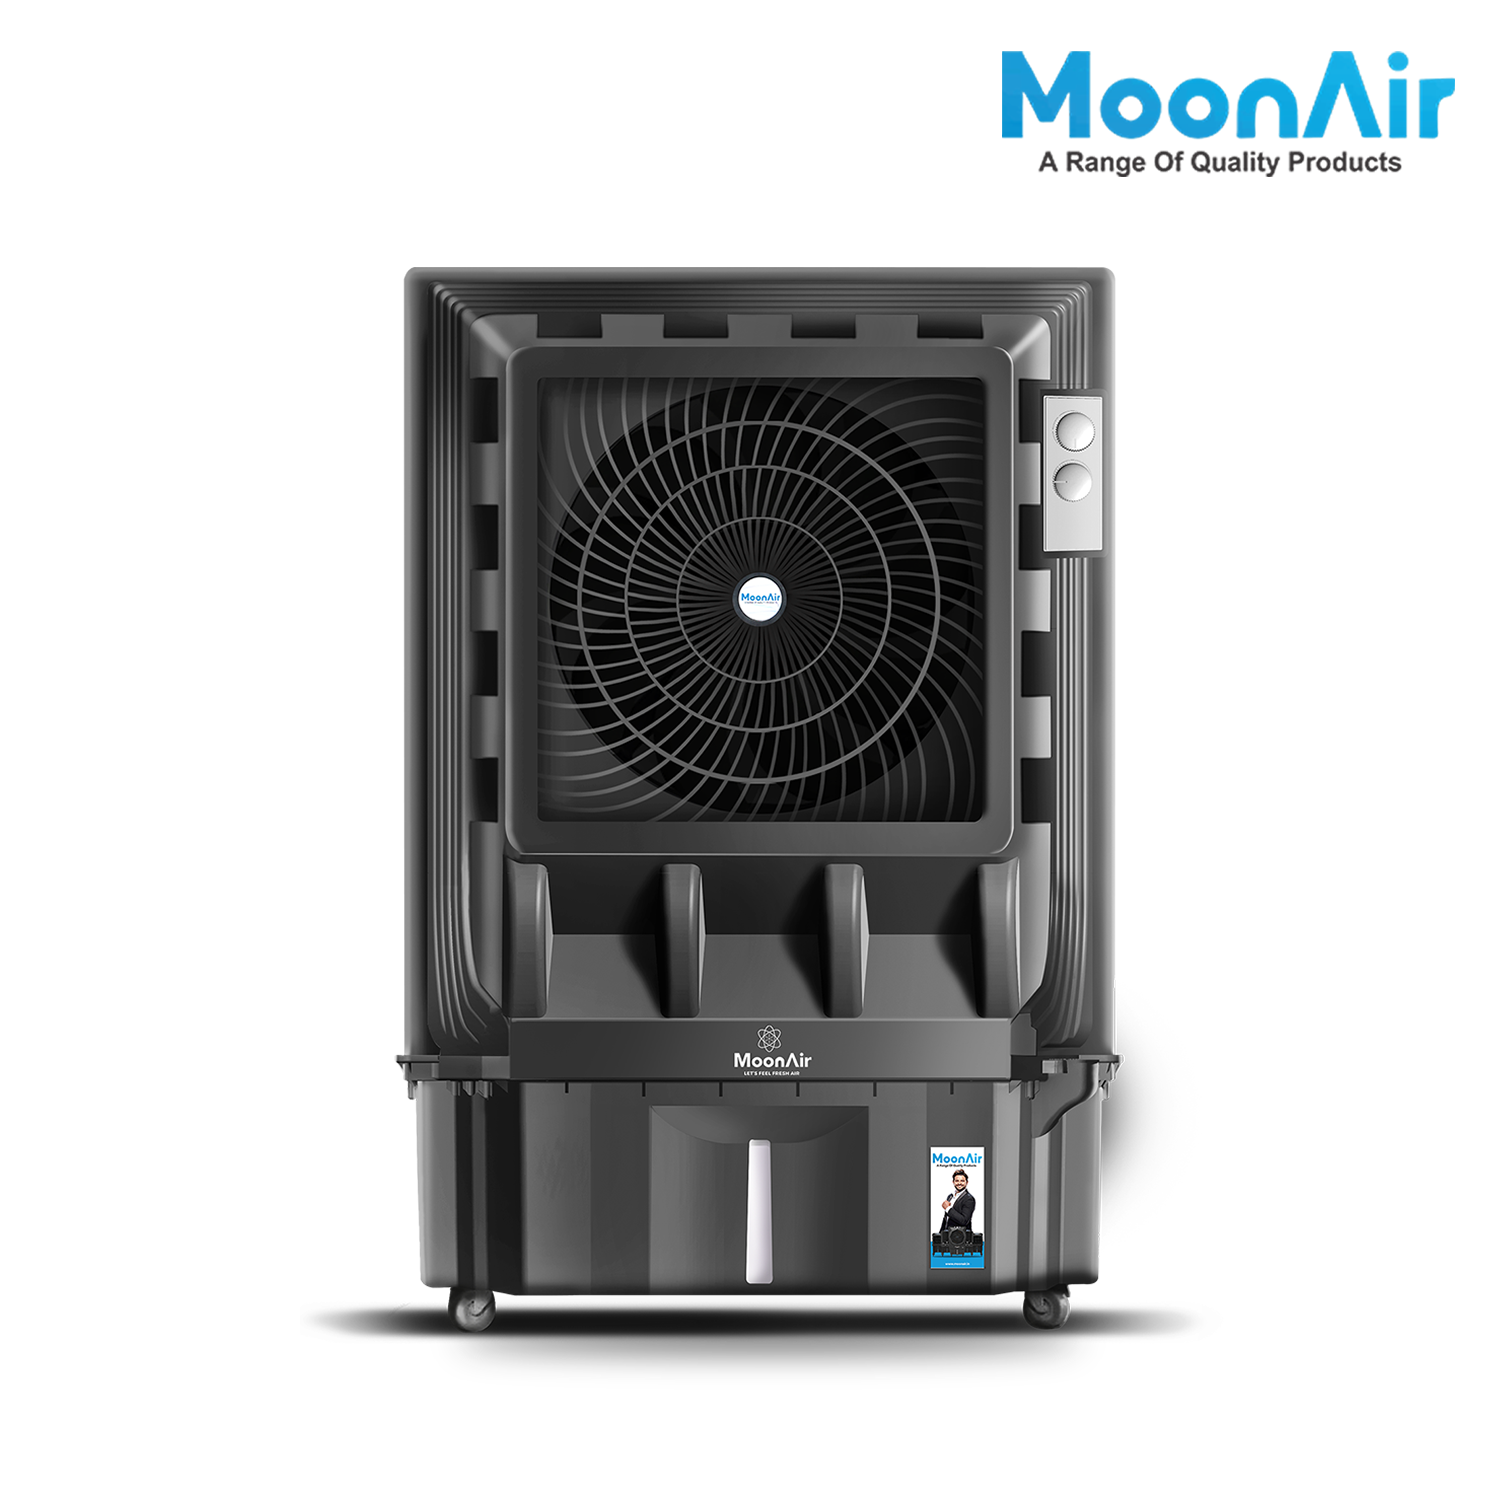 MoonAir Plastic Mahaveer 110 L Commercial Air Cooler For Home, Hi-efficiency For Powerful With Auto Swing, 4-Way Air Deflection and Powerful Air Throw With High-Density Honeycomb pads, Air Cooler, Commercial Cooler, Commercial Air Cooler, Commercial Water Cooler; Premium Black